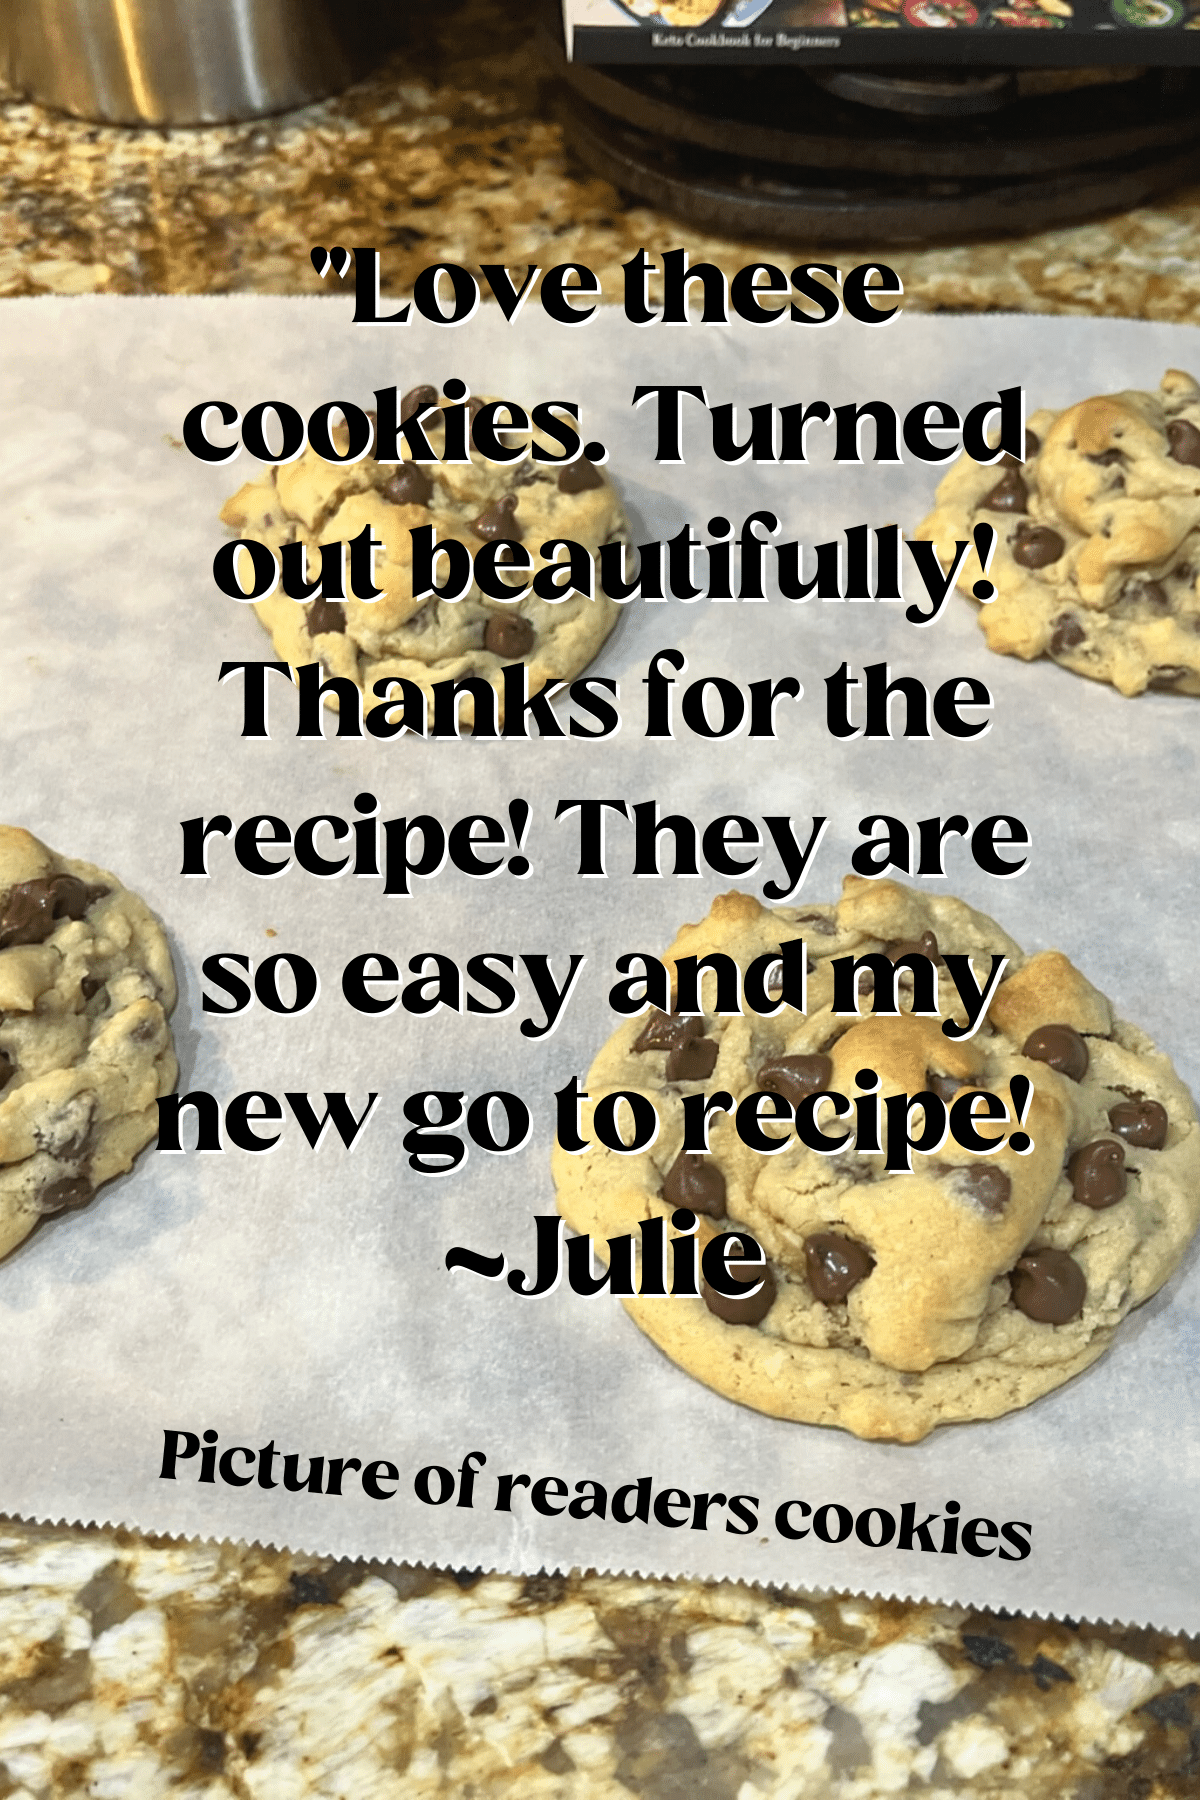 Image of readers copycat Crumbl Chocolate Chip Cookies on parchment paper. 